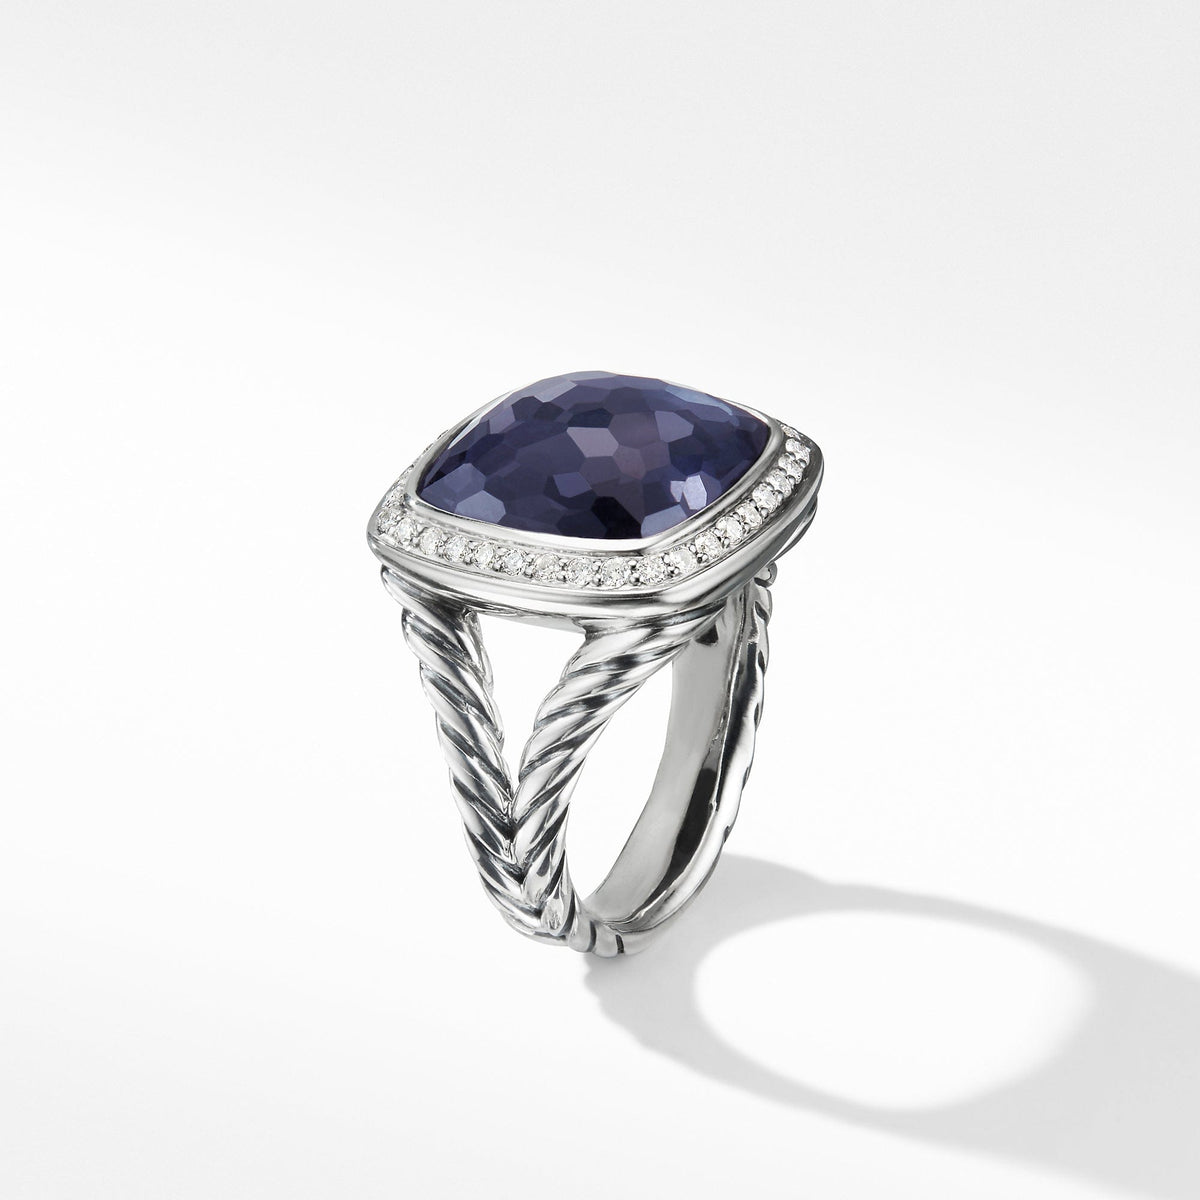 Ring with Lavender Amethyst and Diamonds